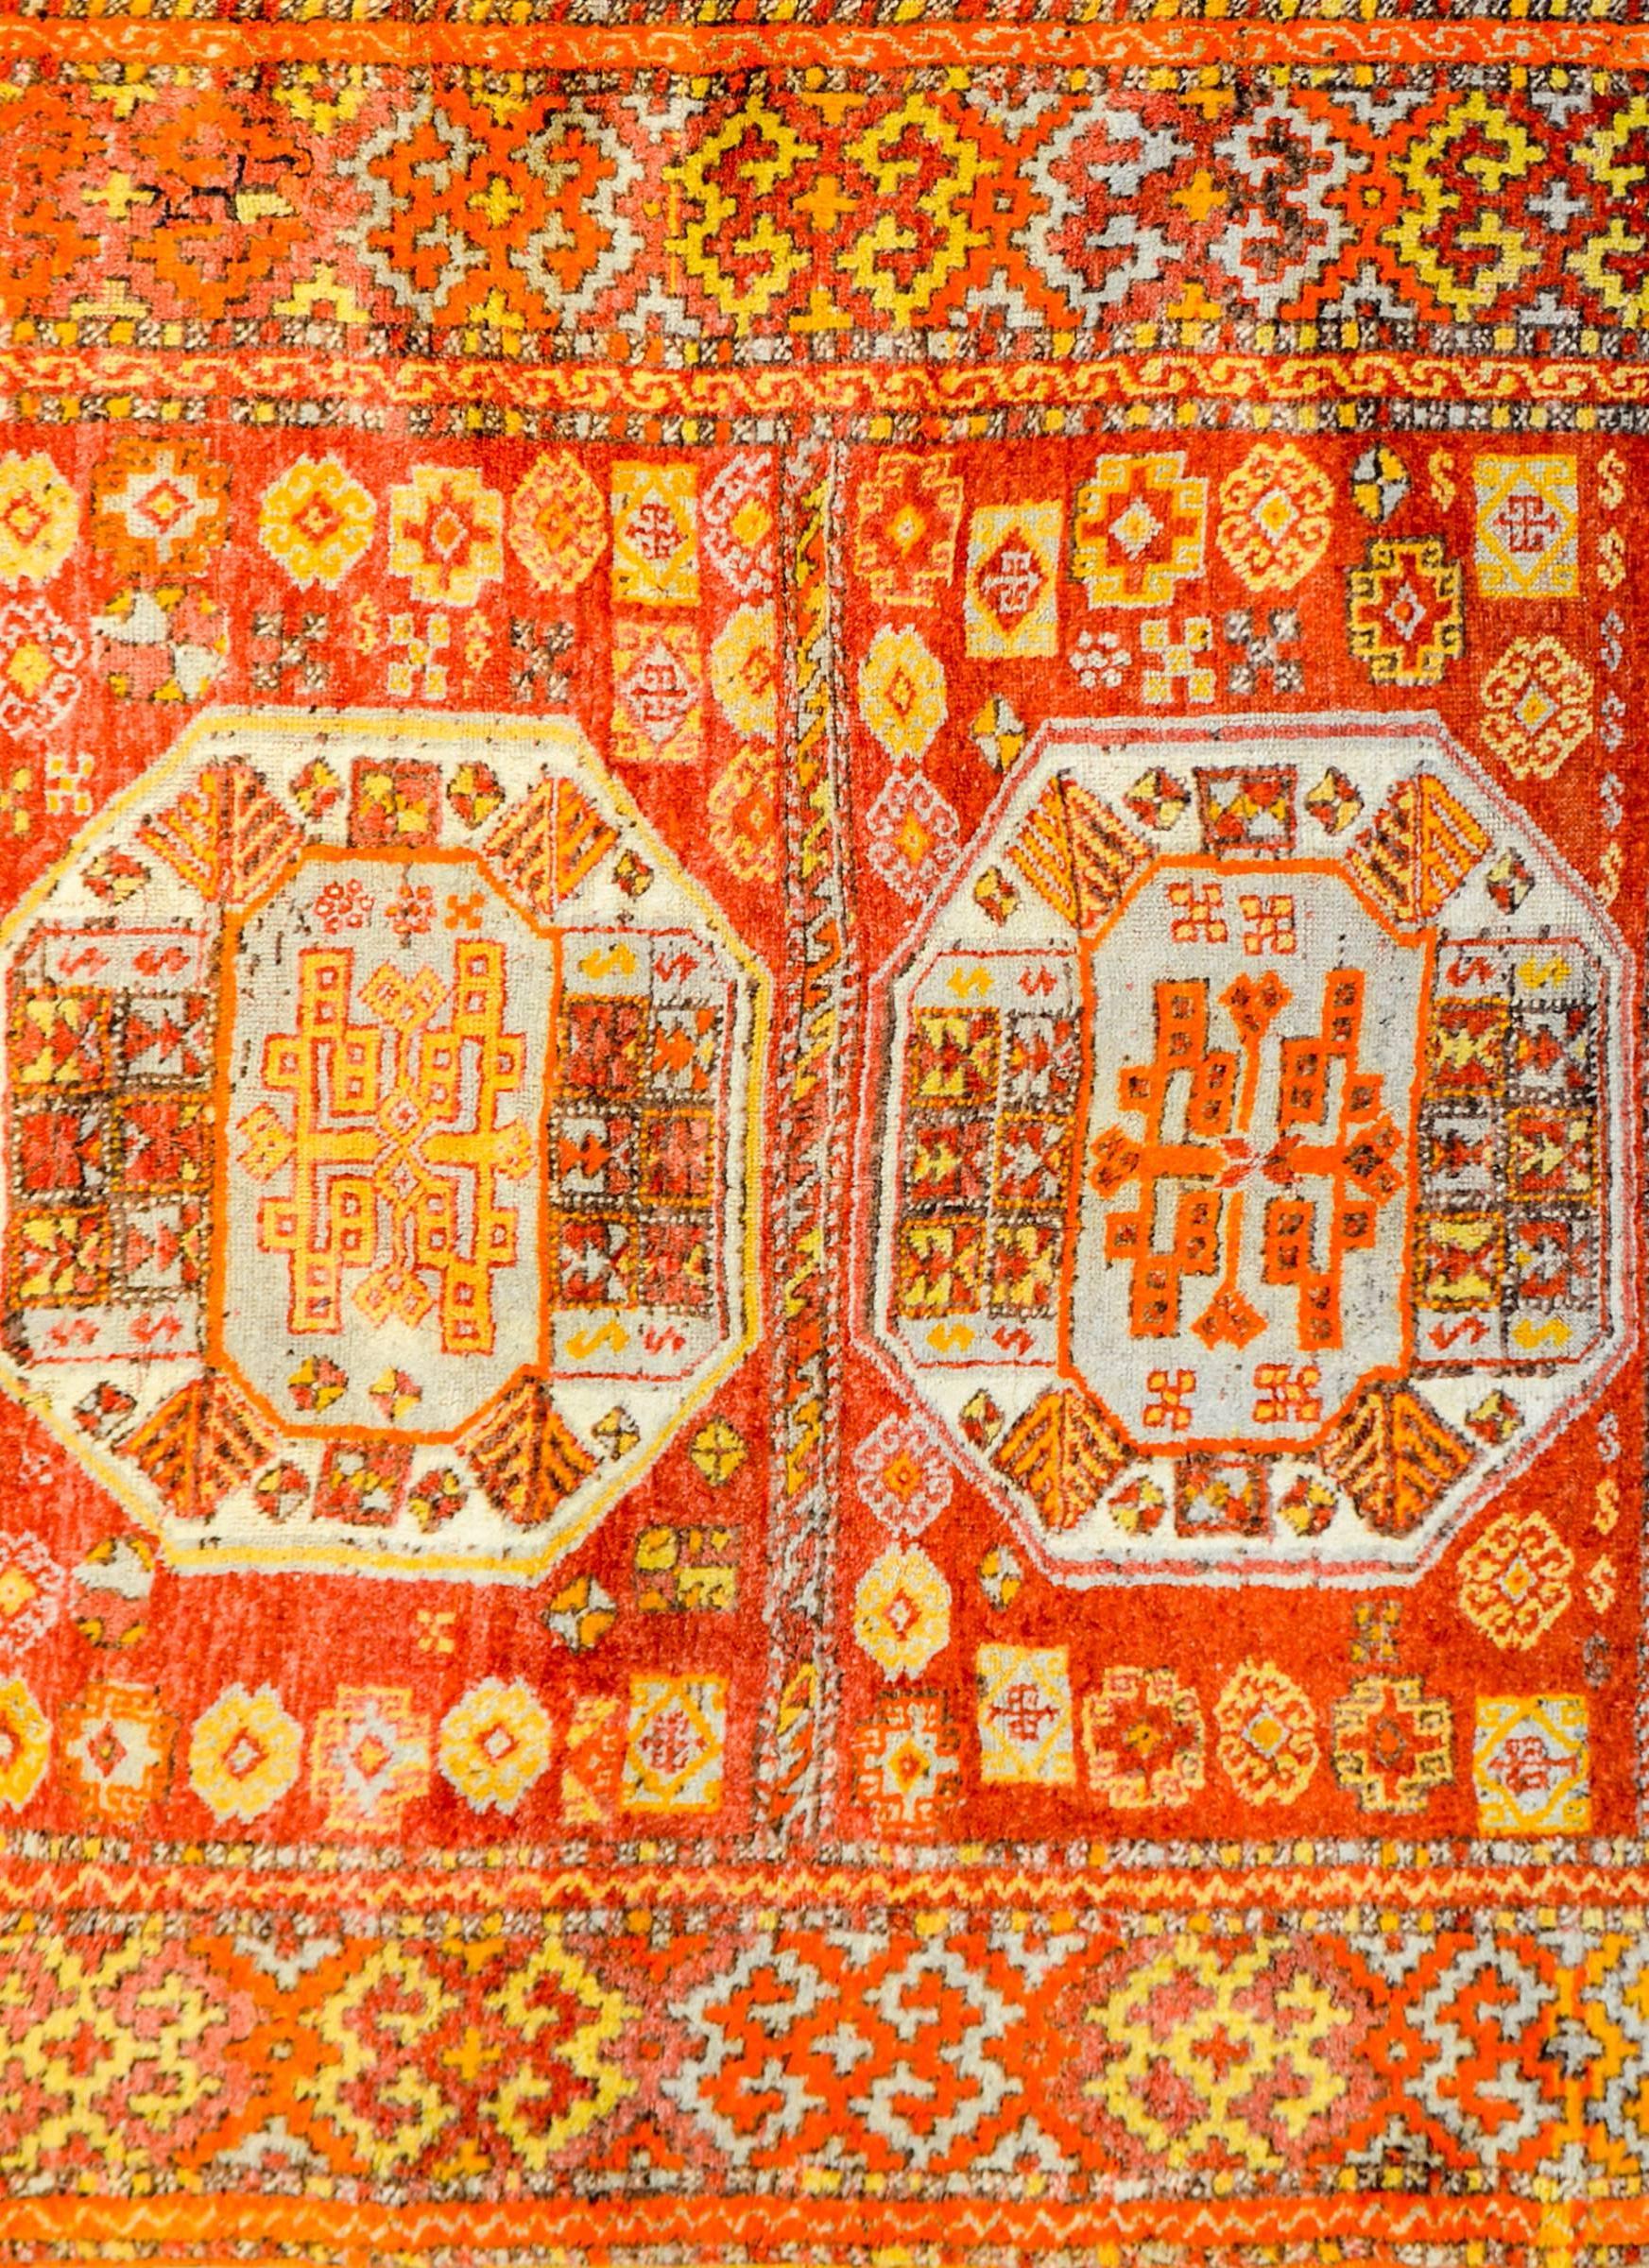 A wonderful vintage Turkish Anatolian rug with an incredible tribal pattern of hexagonal medallions woven in brilliant crimson, gold, orange, and white vegetable dyed wool, surrounded by similarly patterned and colored borders.